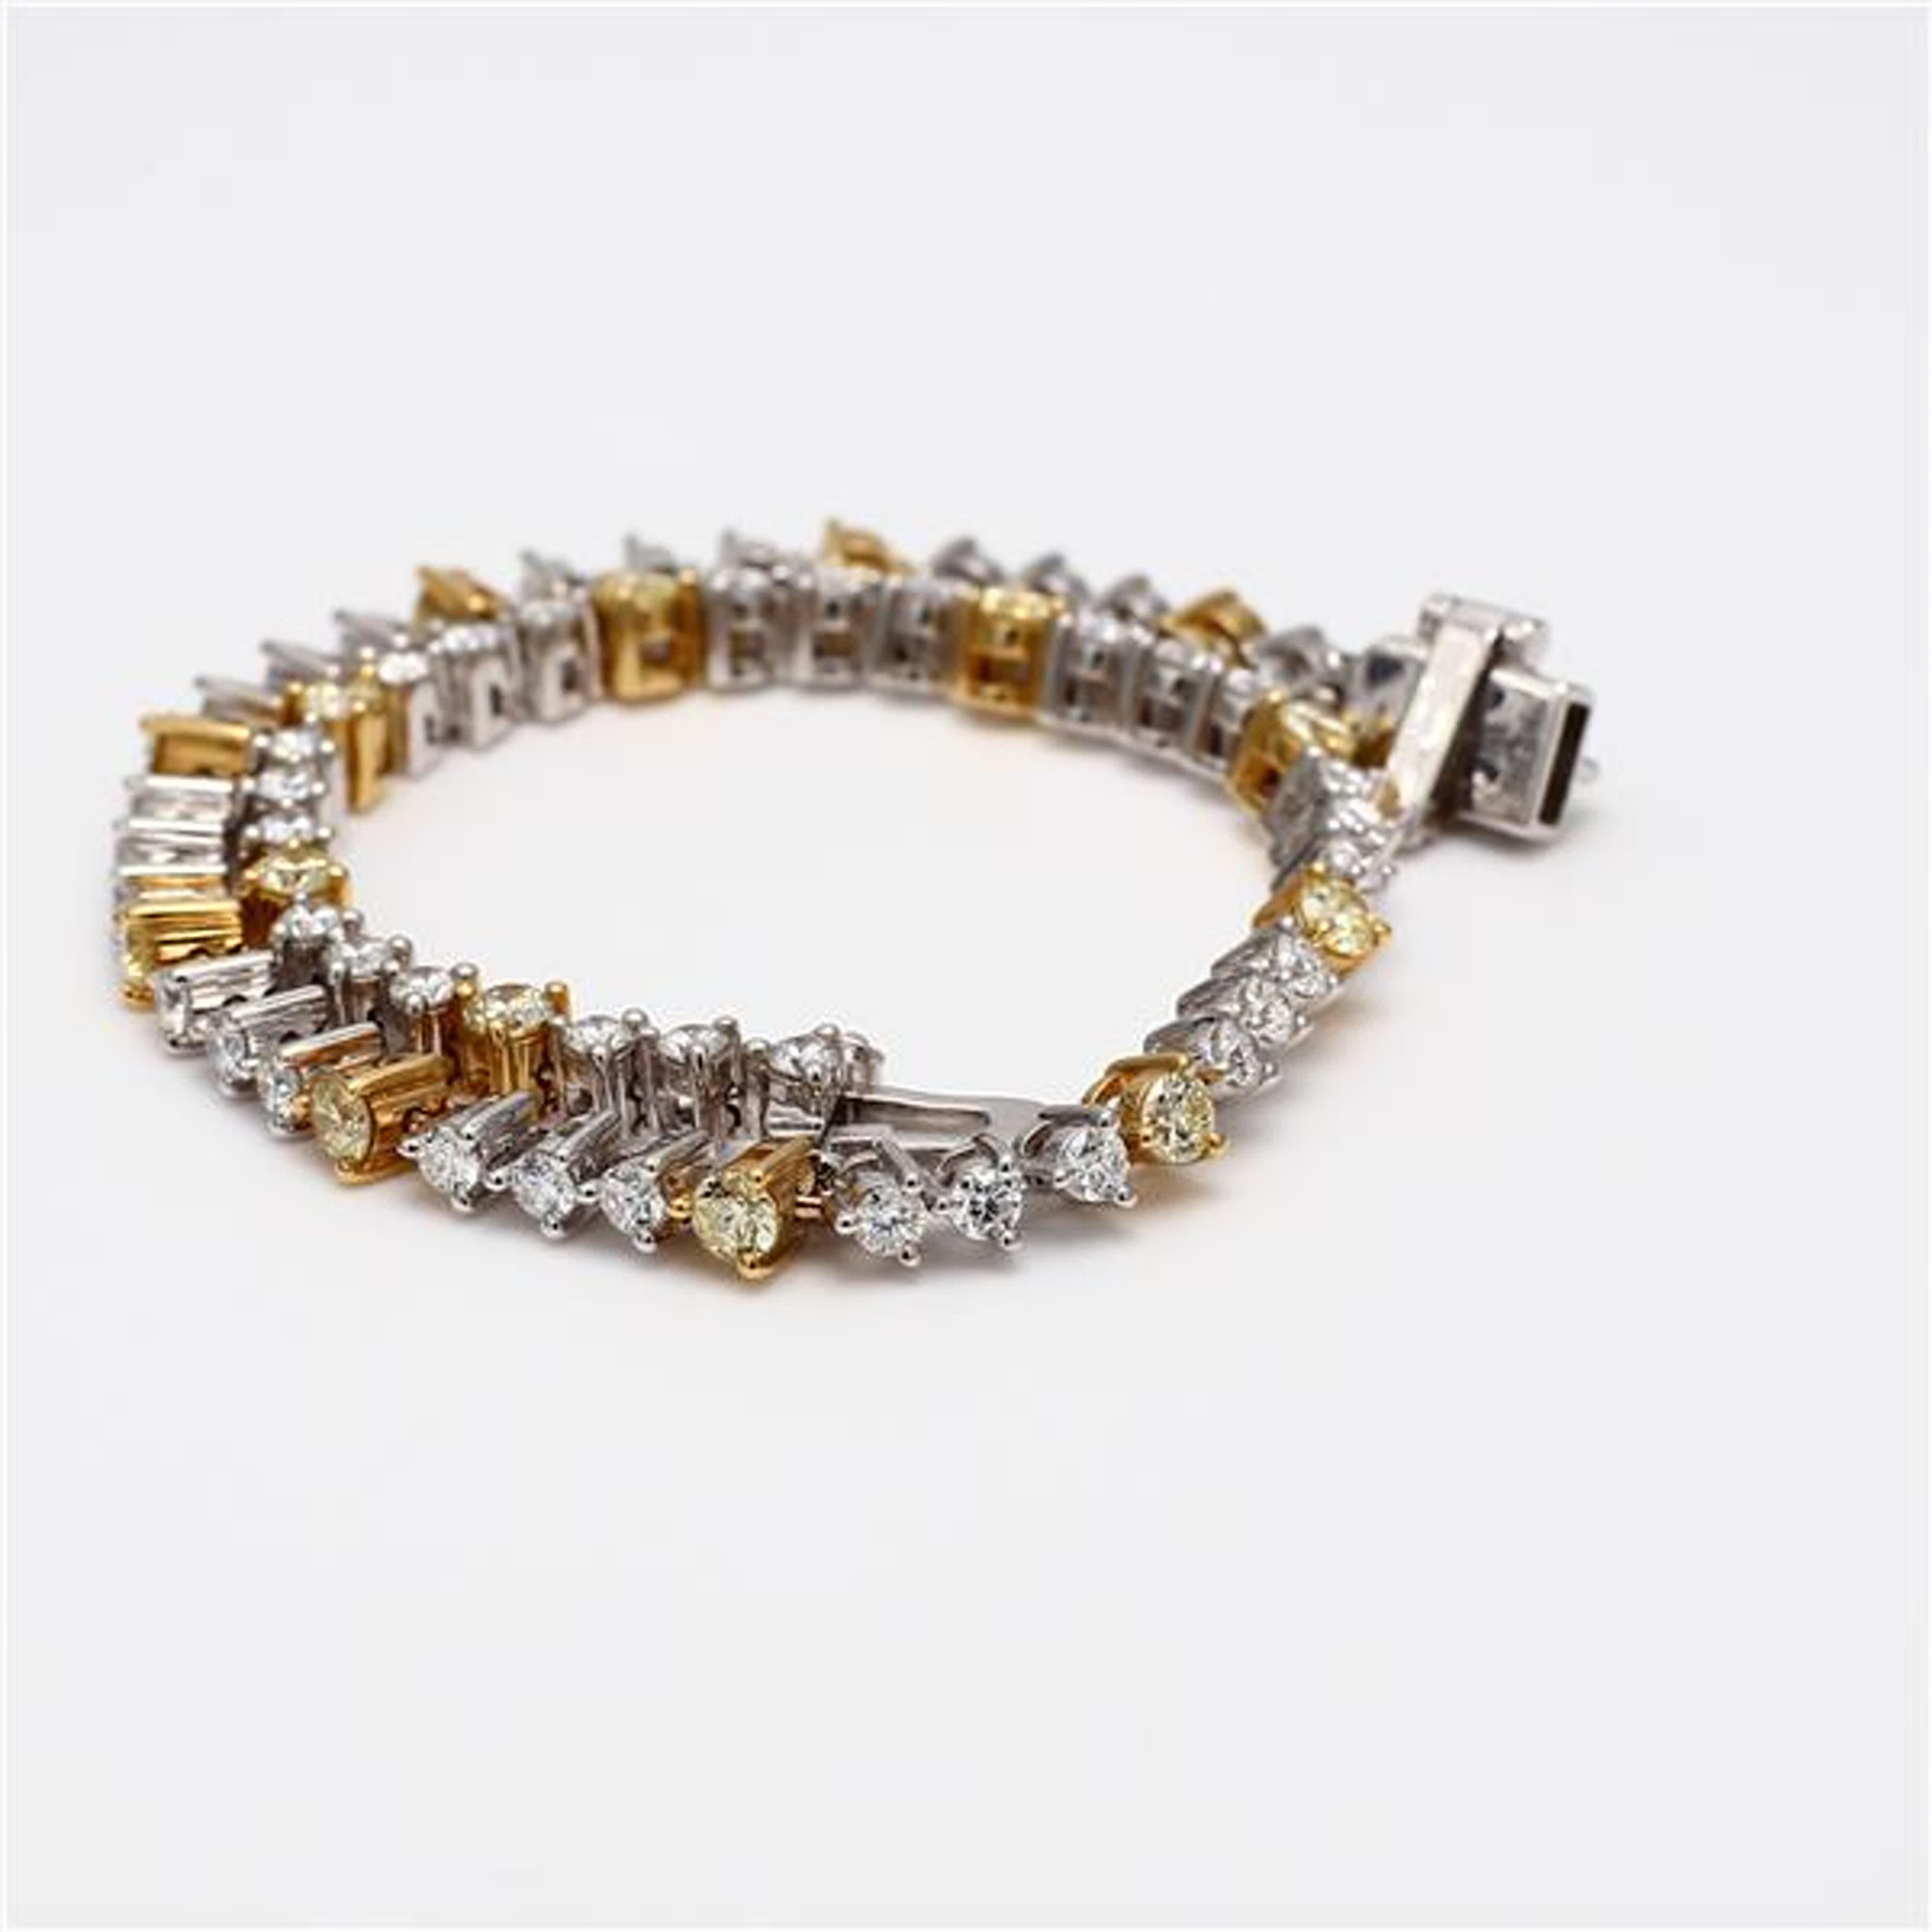 Contemporary Natural Yellow Round and White Diamond 2.36 Carat TW Gold Bracelet